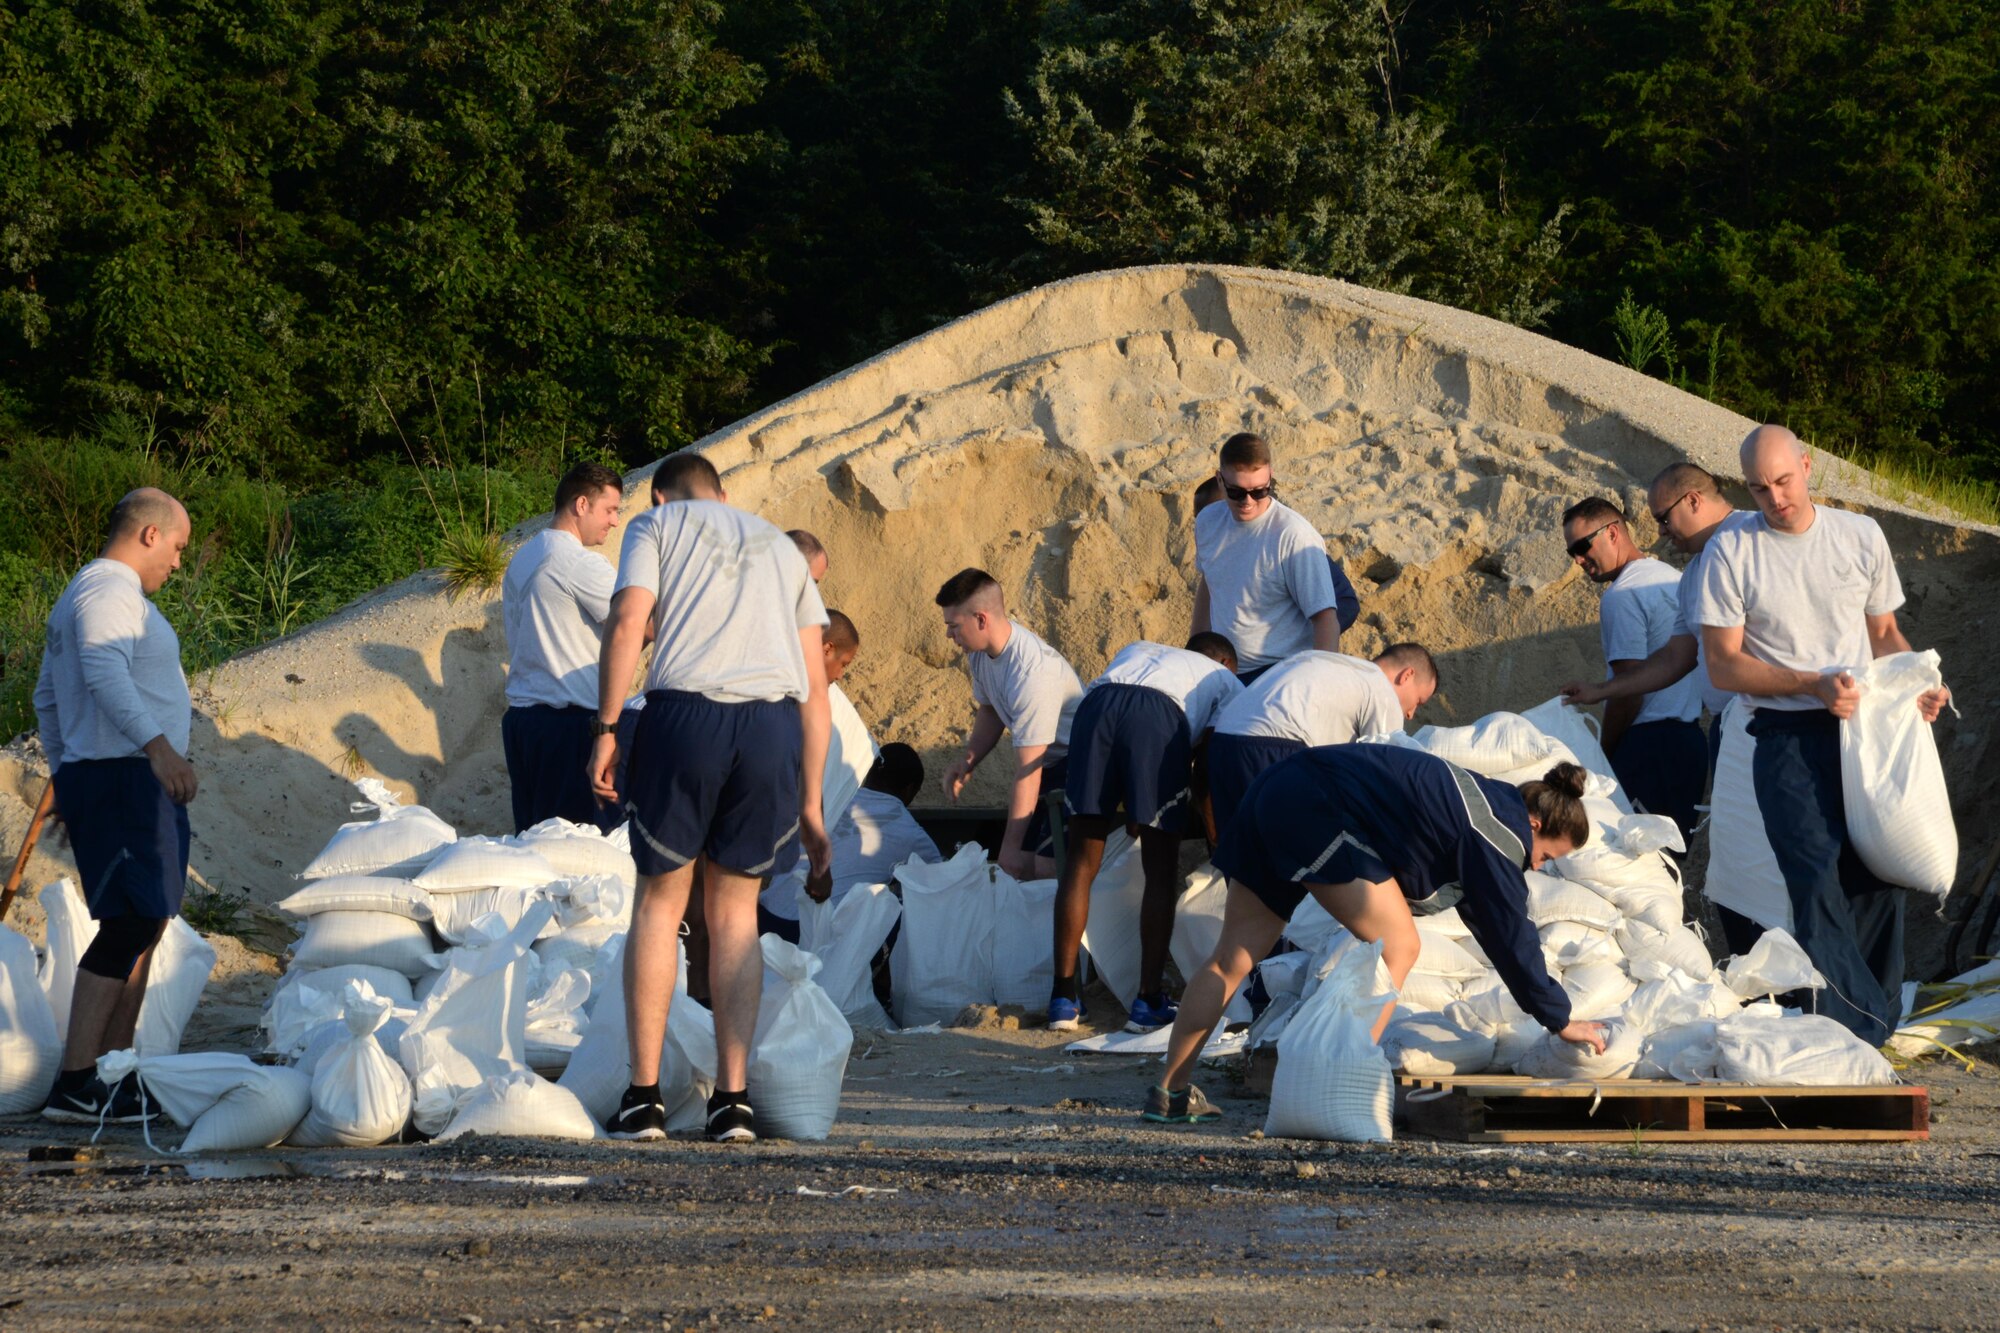 436th Civil Engineer Squadron Airmen fill sandbags for the upcoming 2017 Dover Air Force Base Open House “Thunder Over Dover” Aug. 10, 2017, on Dover AFB, Del.